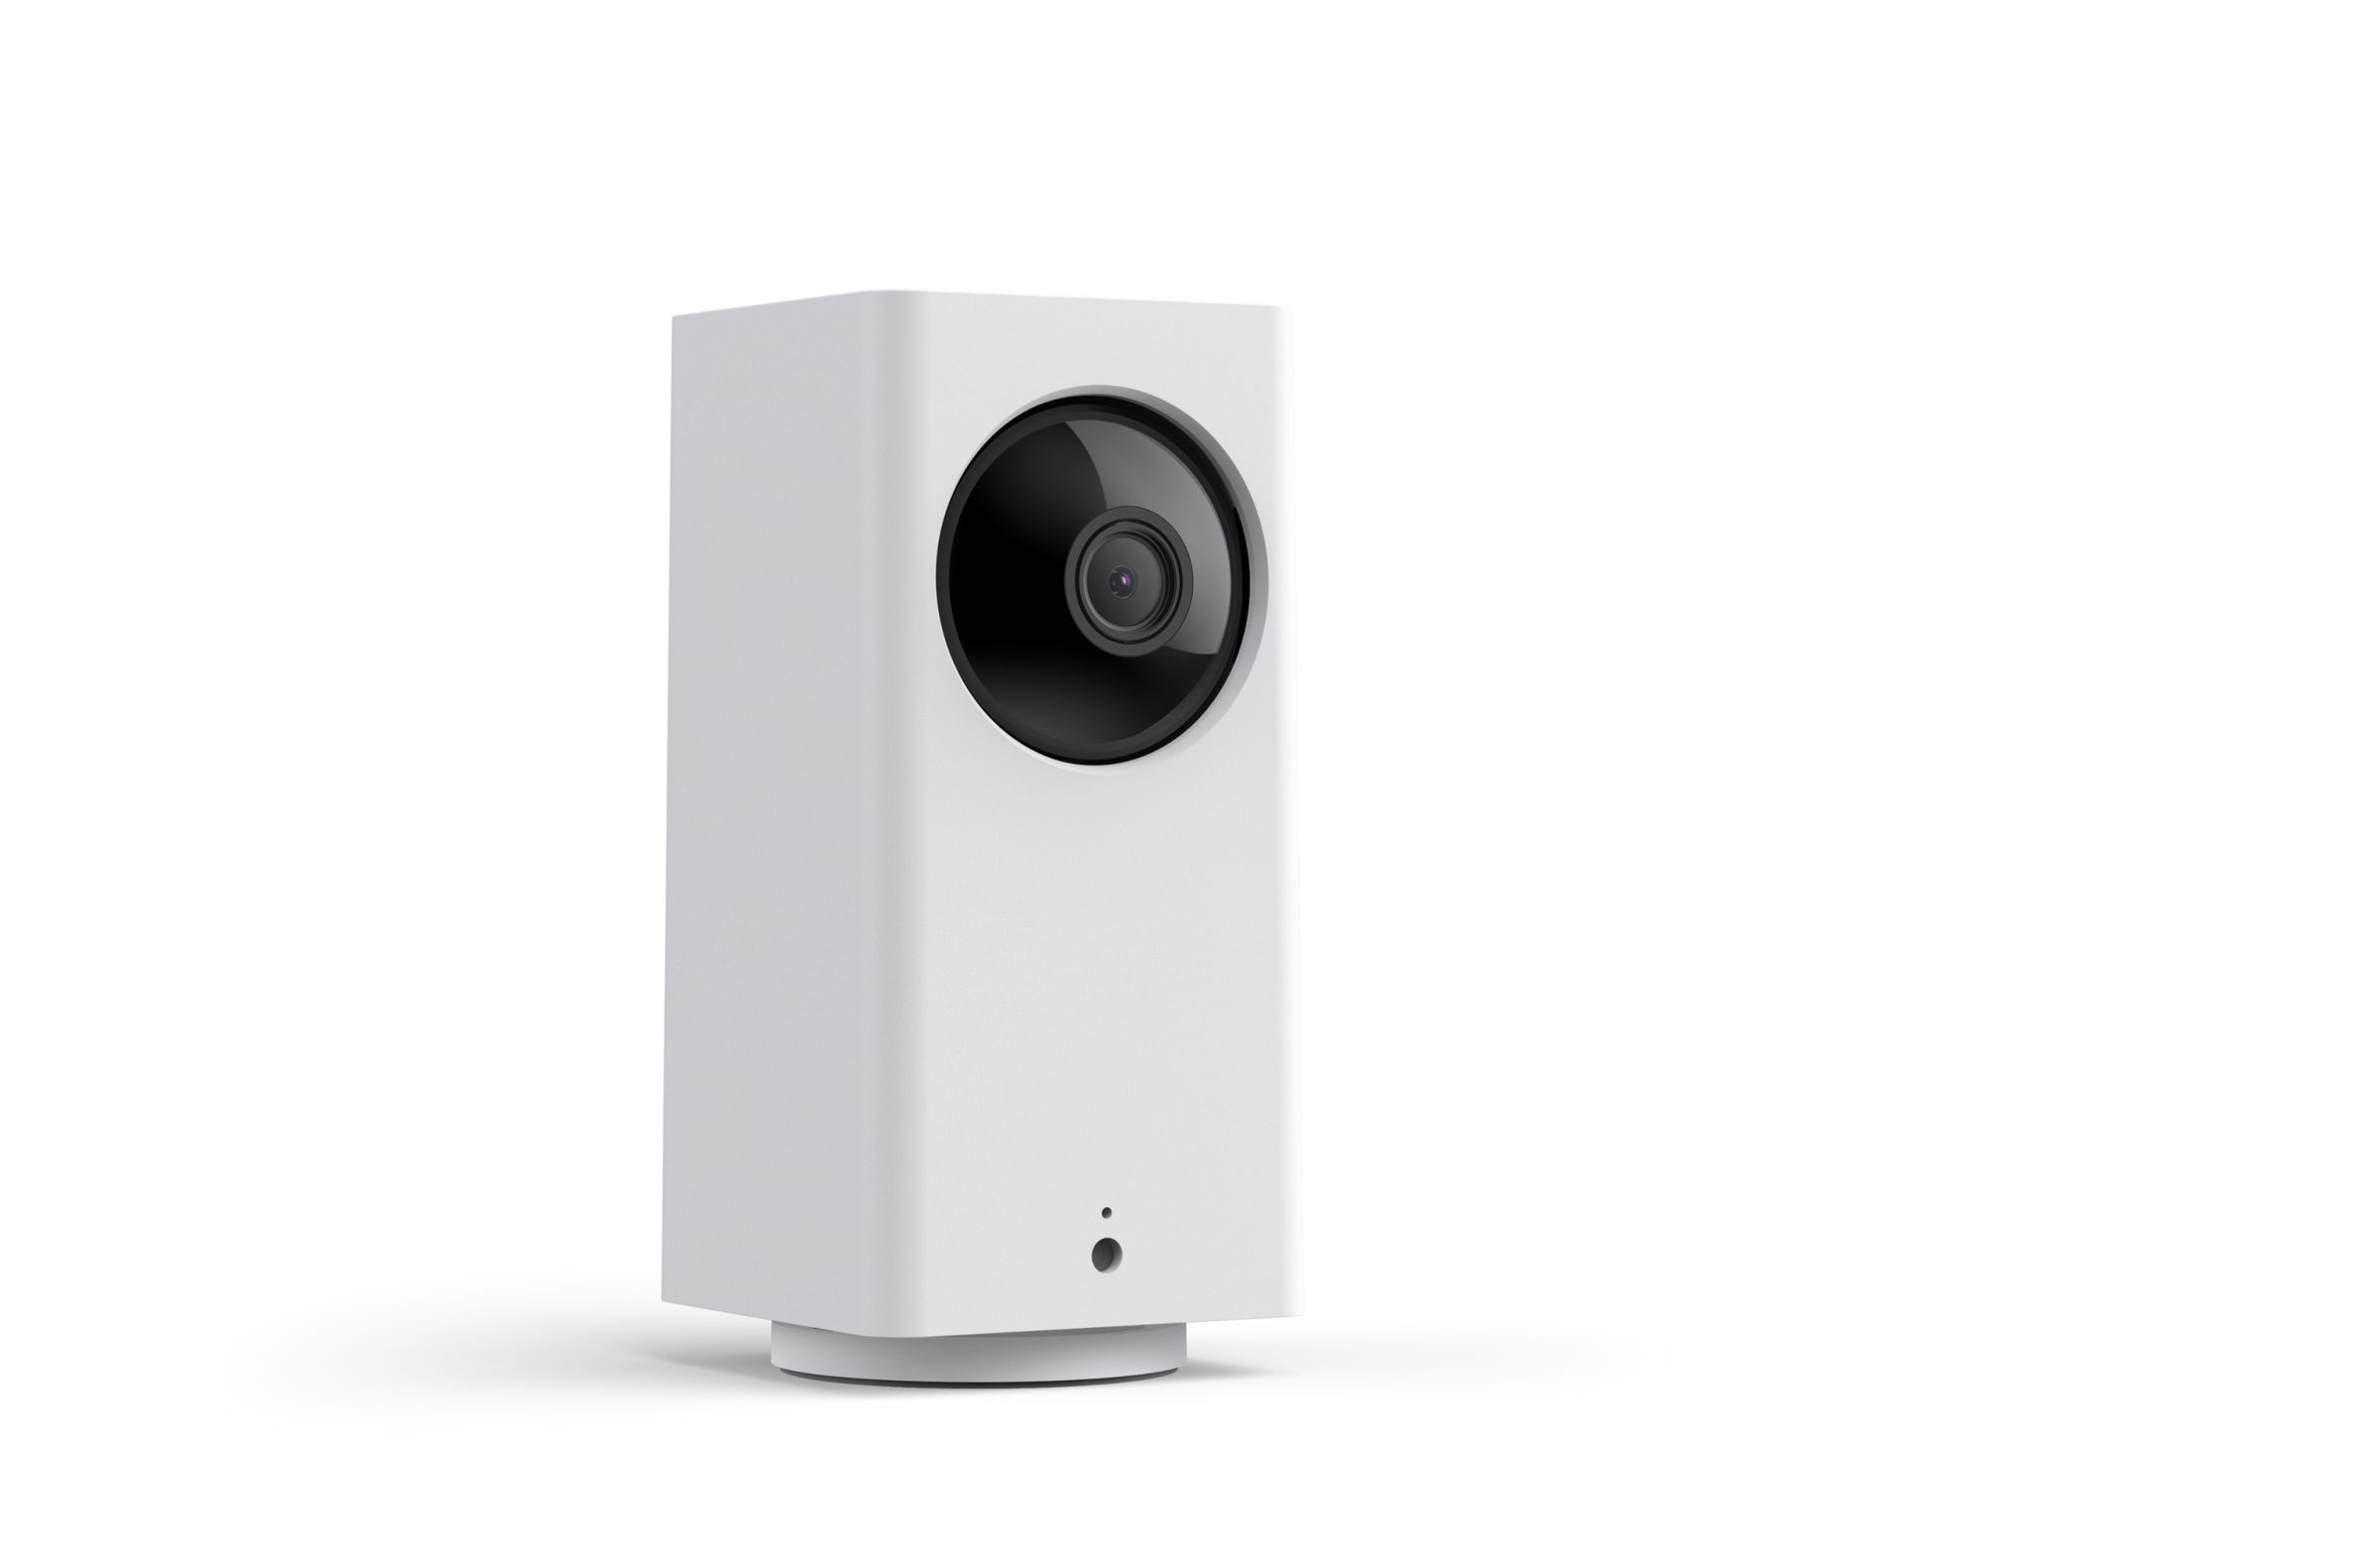 Wyze has refreshed one of its earliest products, the Wyze Cam Pan, adding color night vision and a siren.